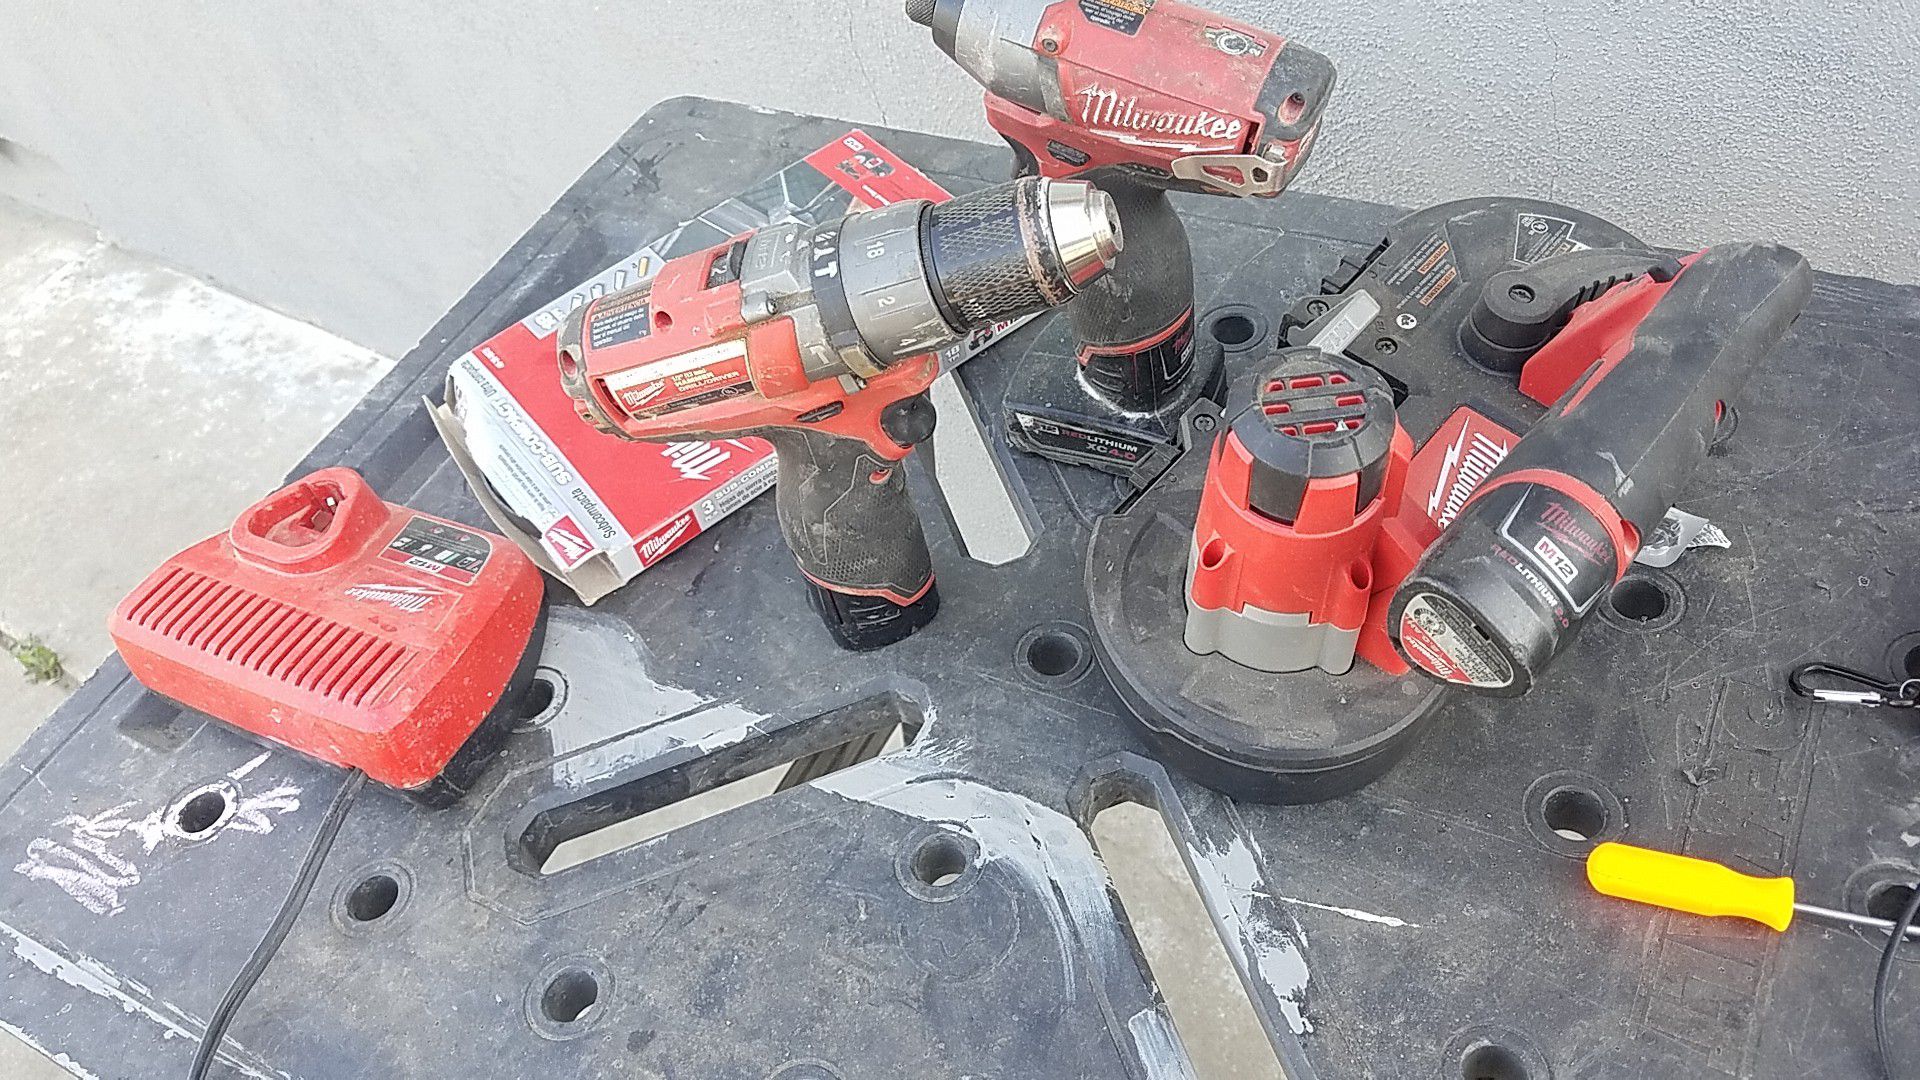 brush less Milwaukee impact and drill and band sawcams with 3 blades 3 baterys